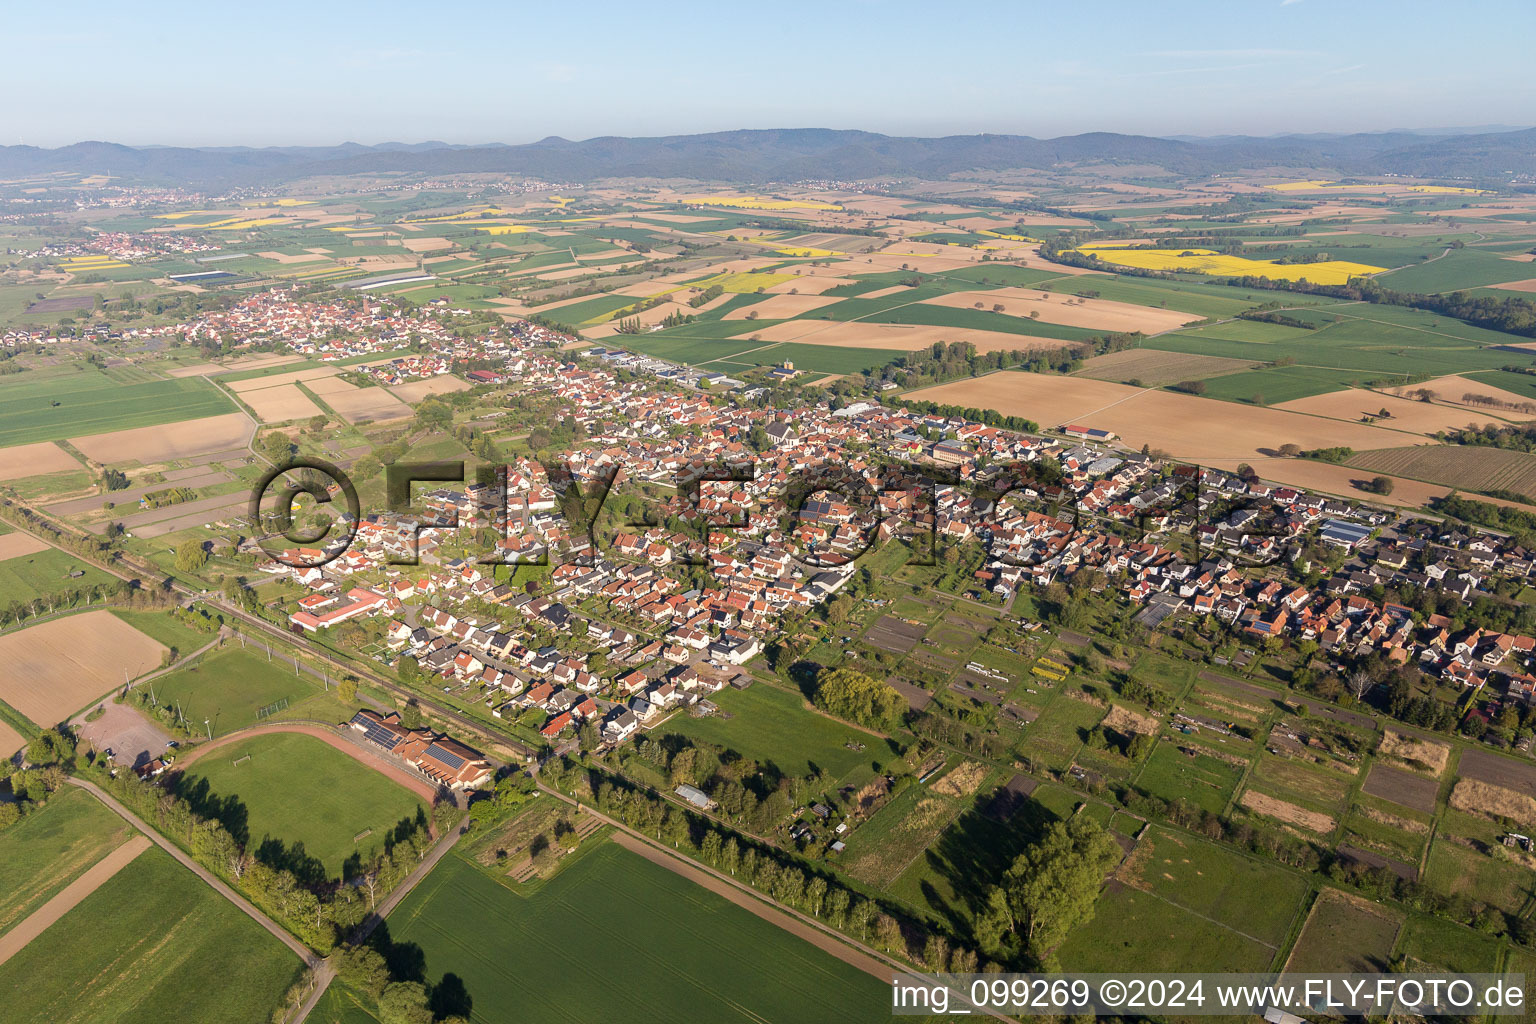 Village - view on the edge of agricultural fields and farmland in Steinfeld in the state Rhineland-Palatinate, Germany